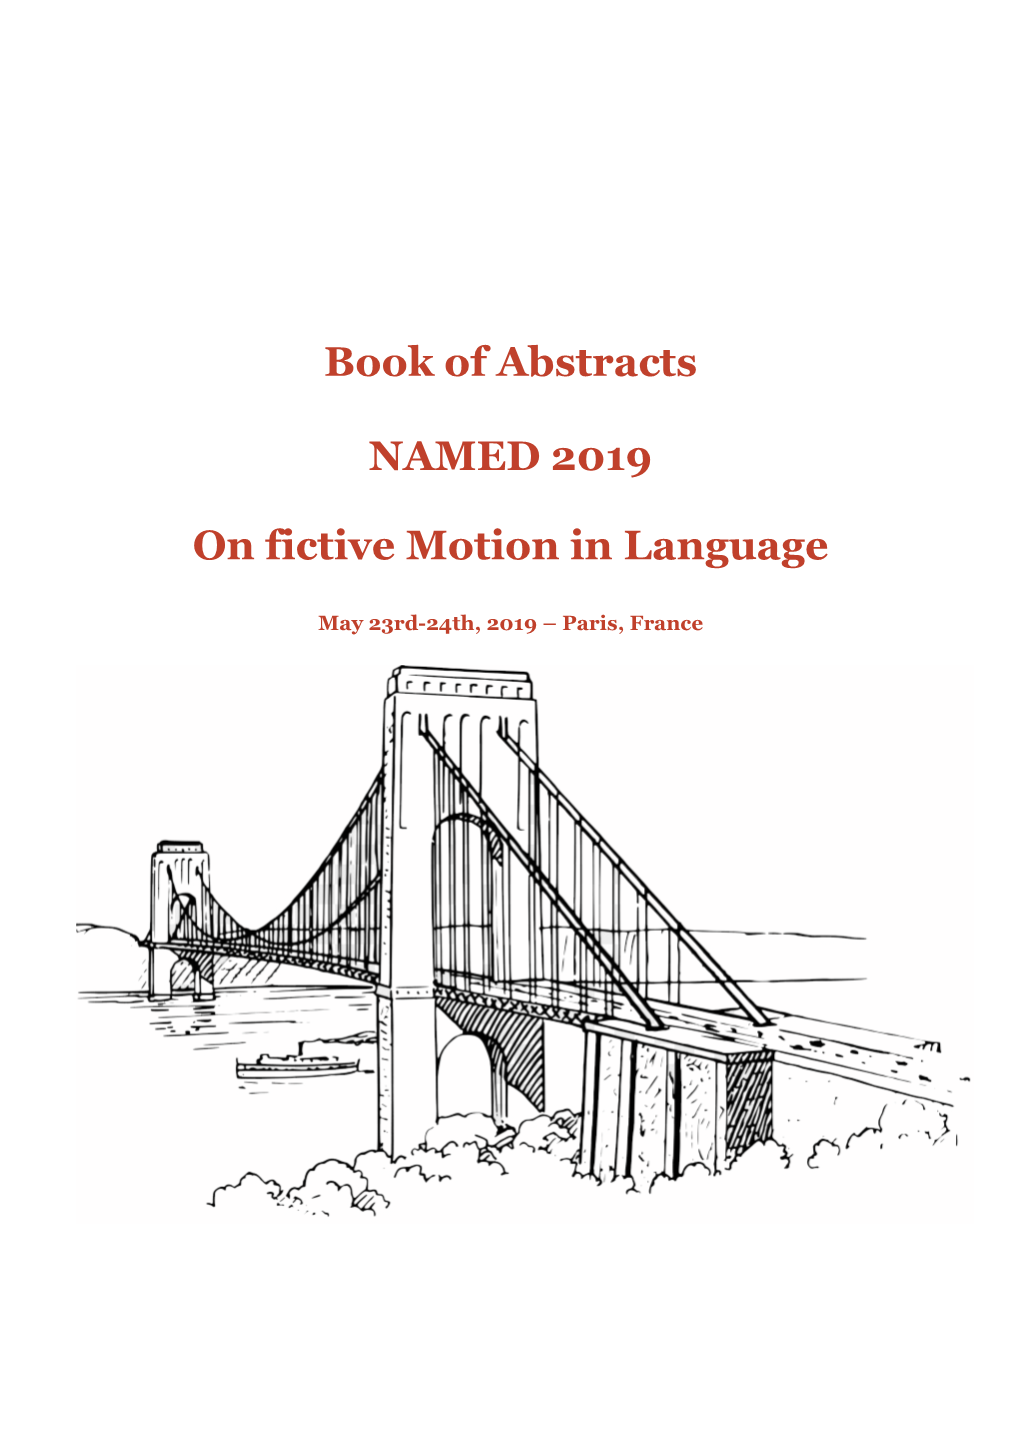 Book of Abstracts NAMED 2019 on Fictive Motion in Language